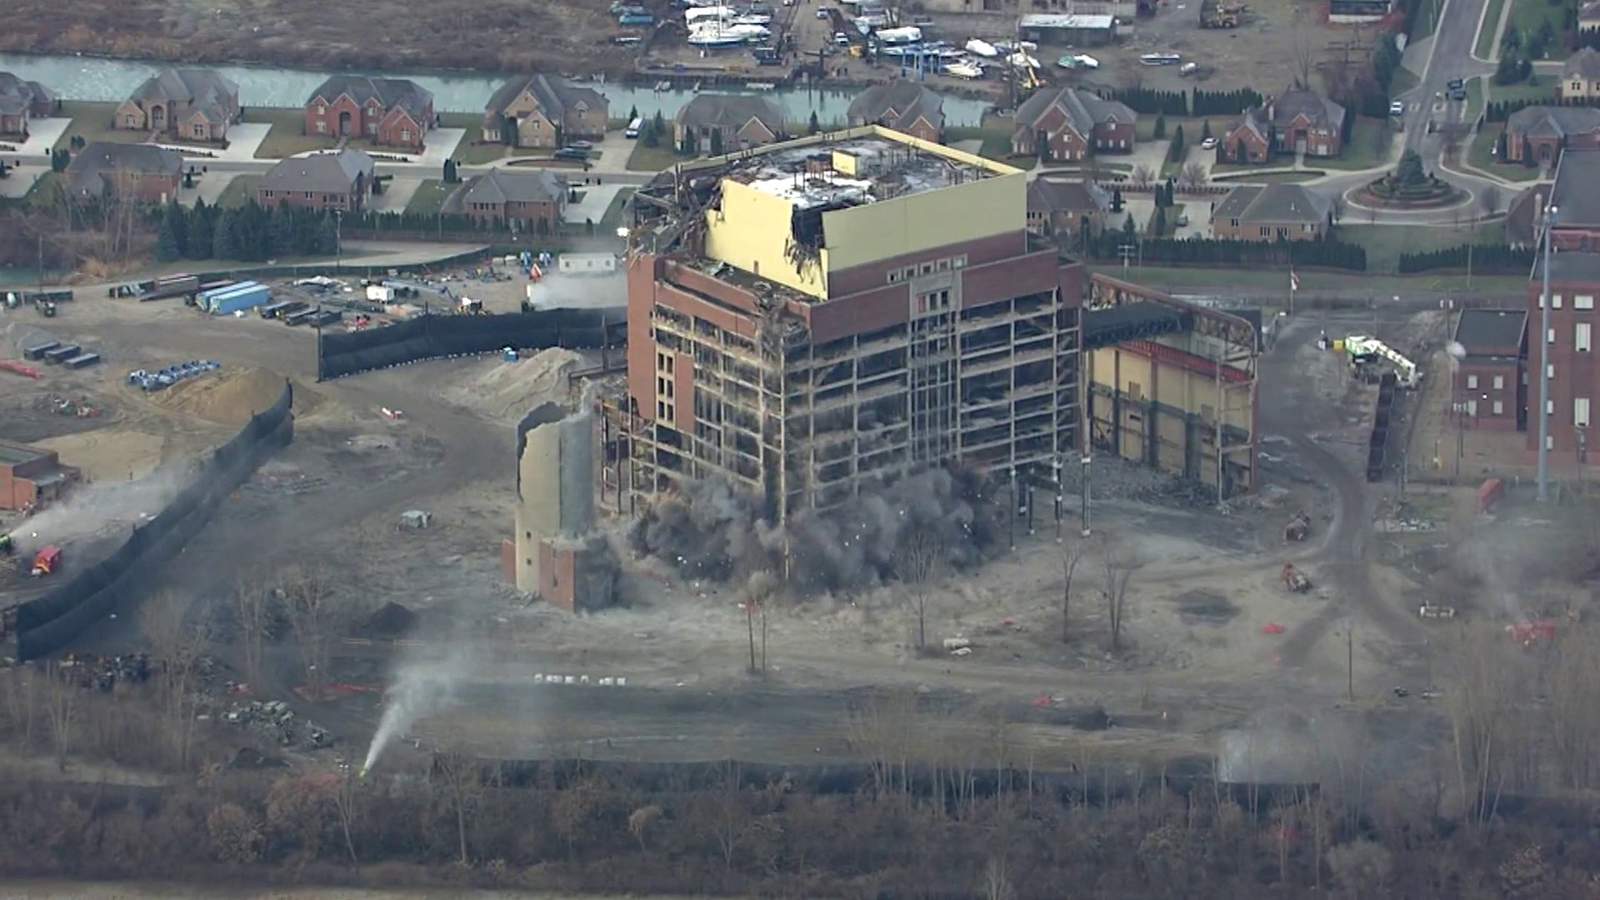 WATCH: DTE Energy implodes old Detroit power plant